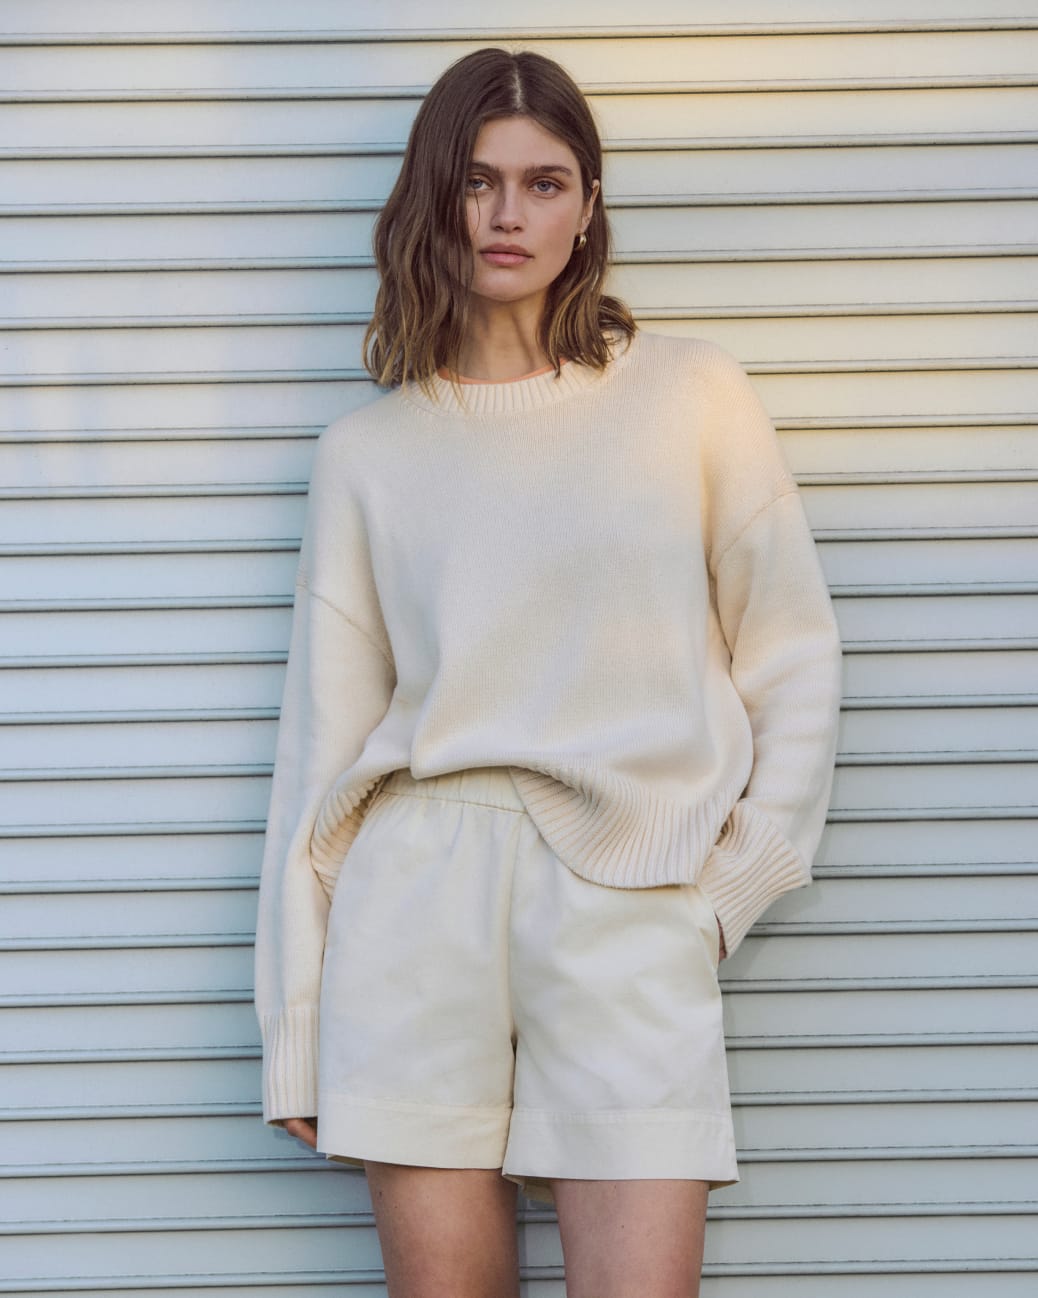 Everlane Just Launched a Collection of Lightweight Linen Clothing